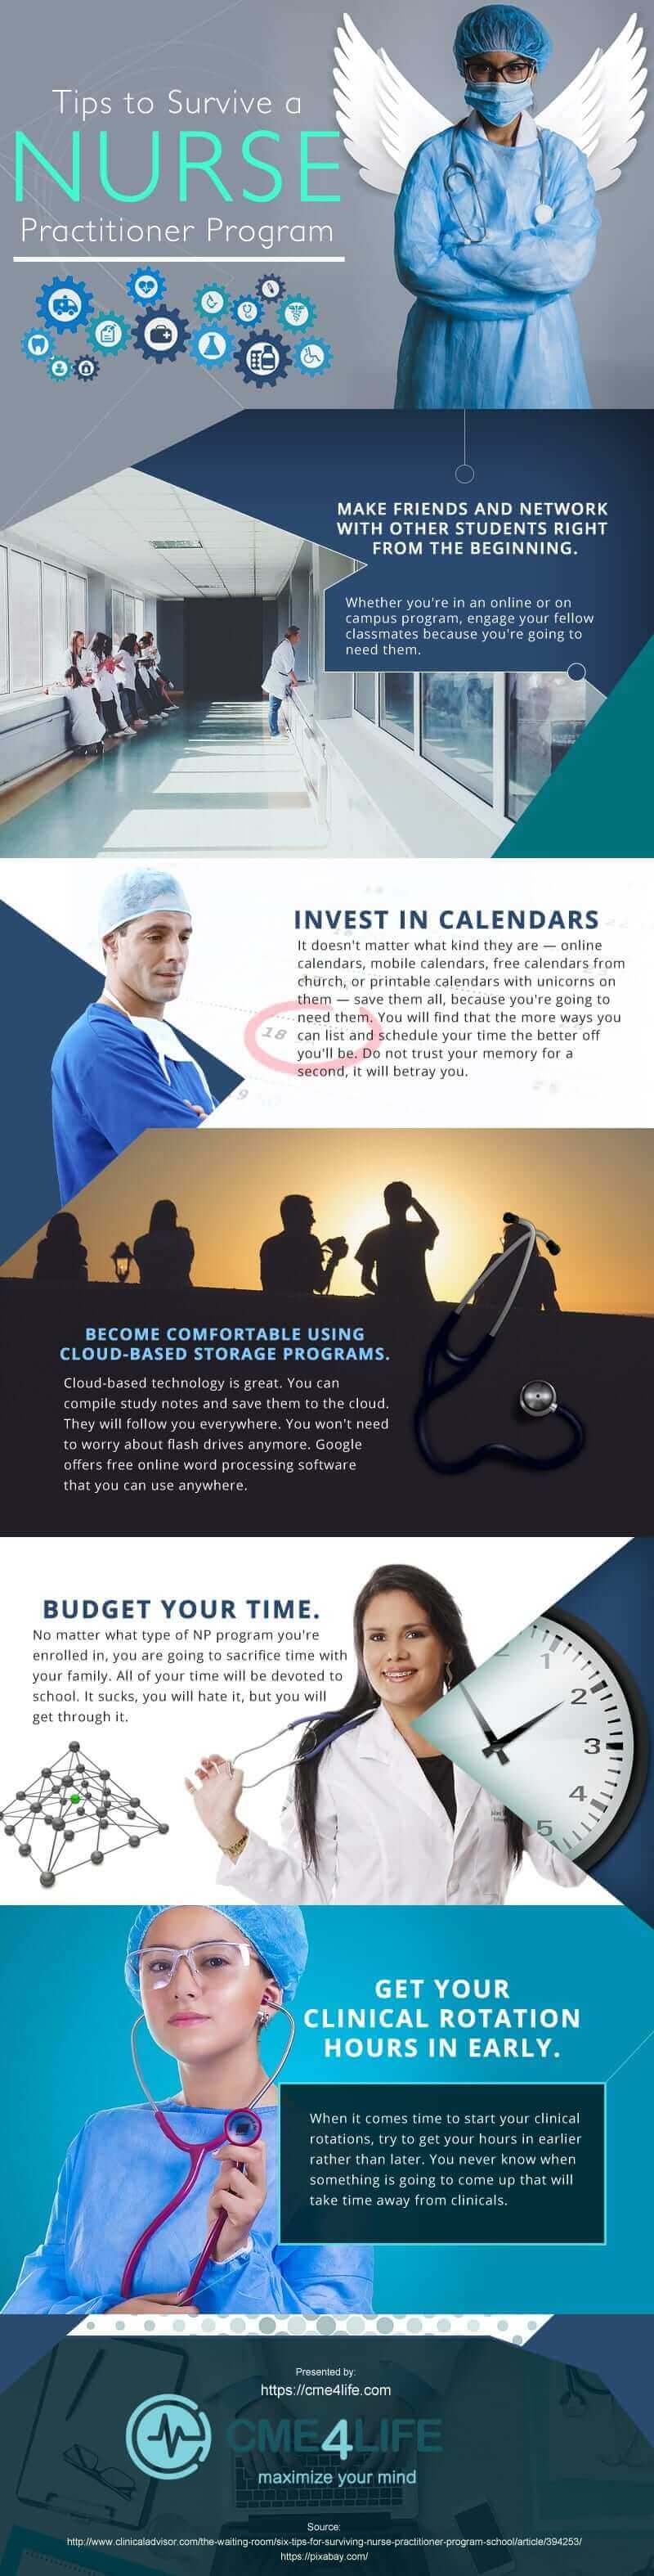 Tips to Survive a Nurse Practitioner Program [infographic]